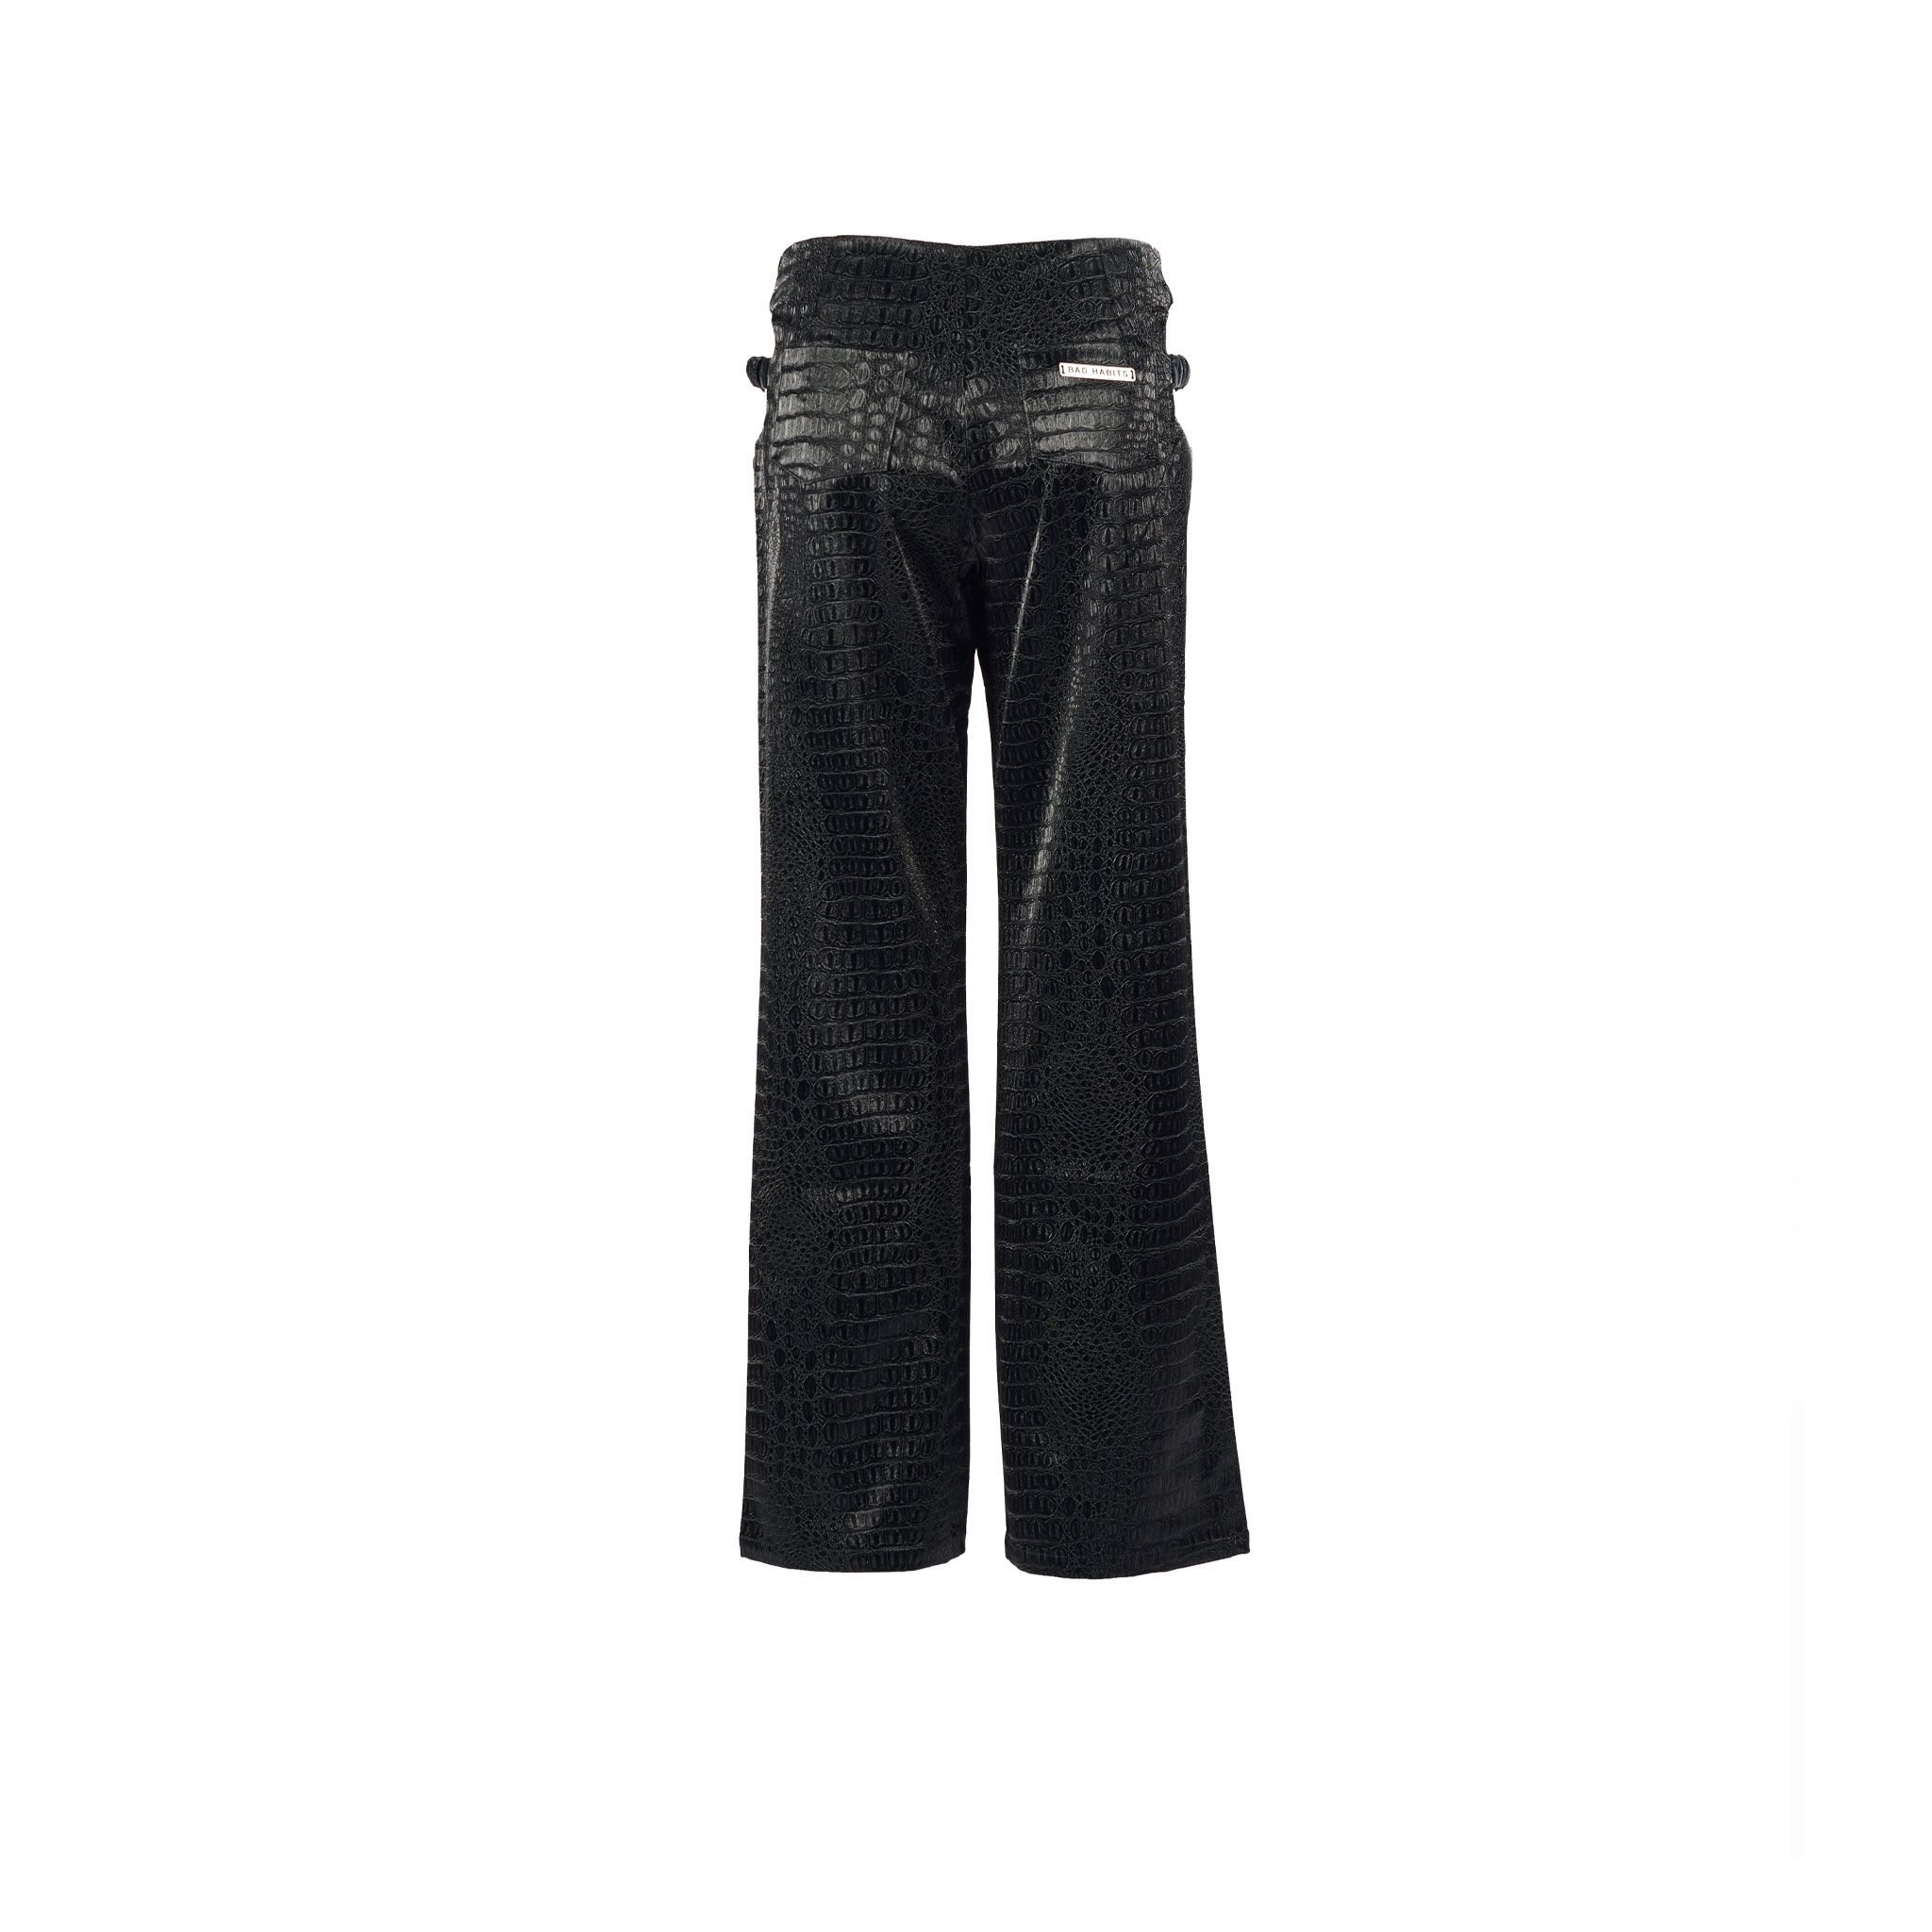 FAUX LEATHER PANTS – Bad Habits Official Store